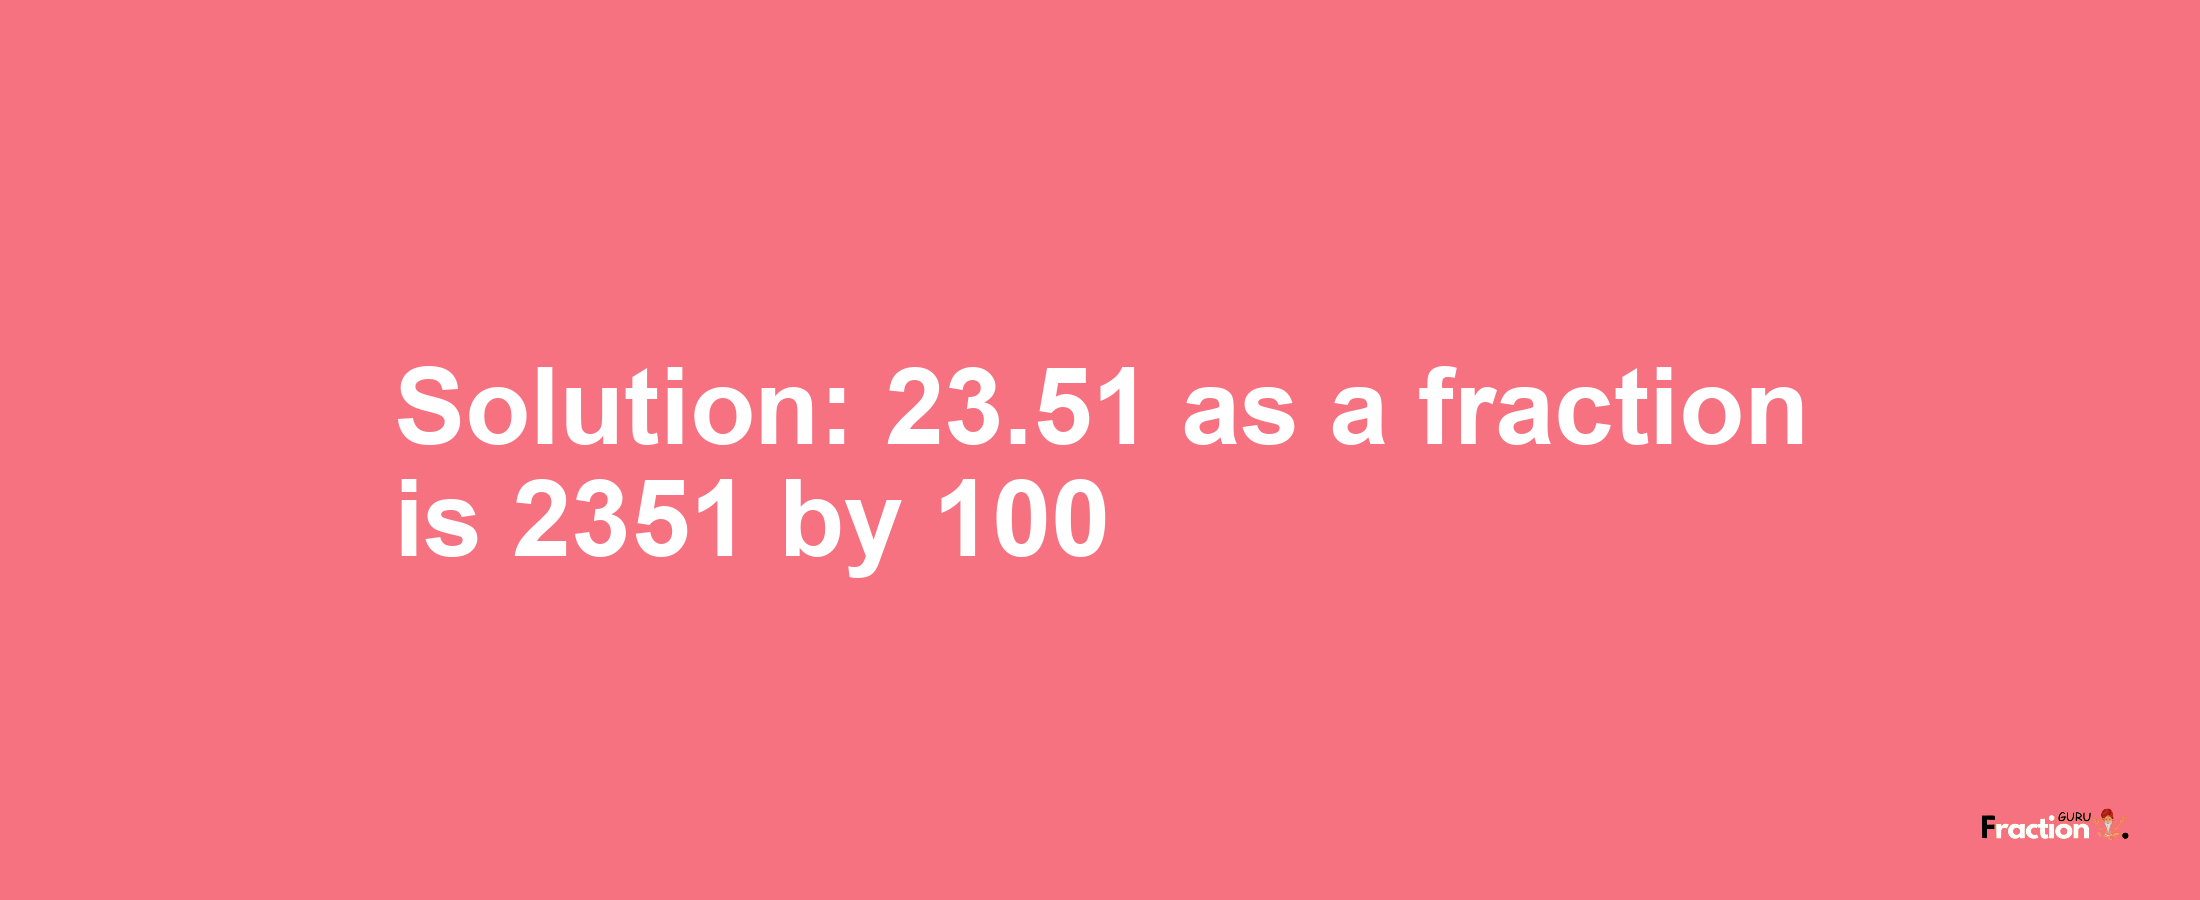 Solution:23.51 as a fraction is 2351/100